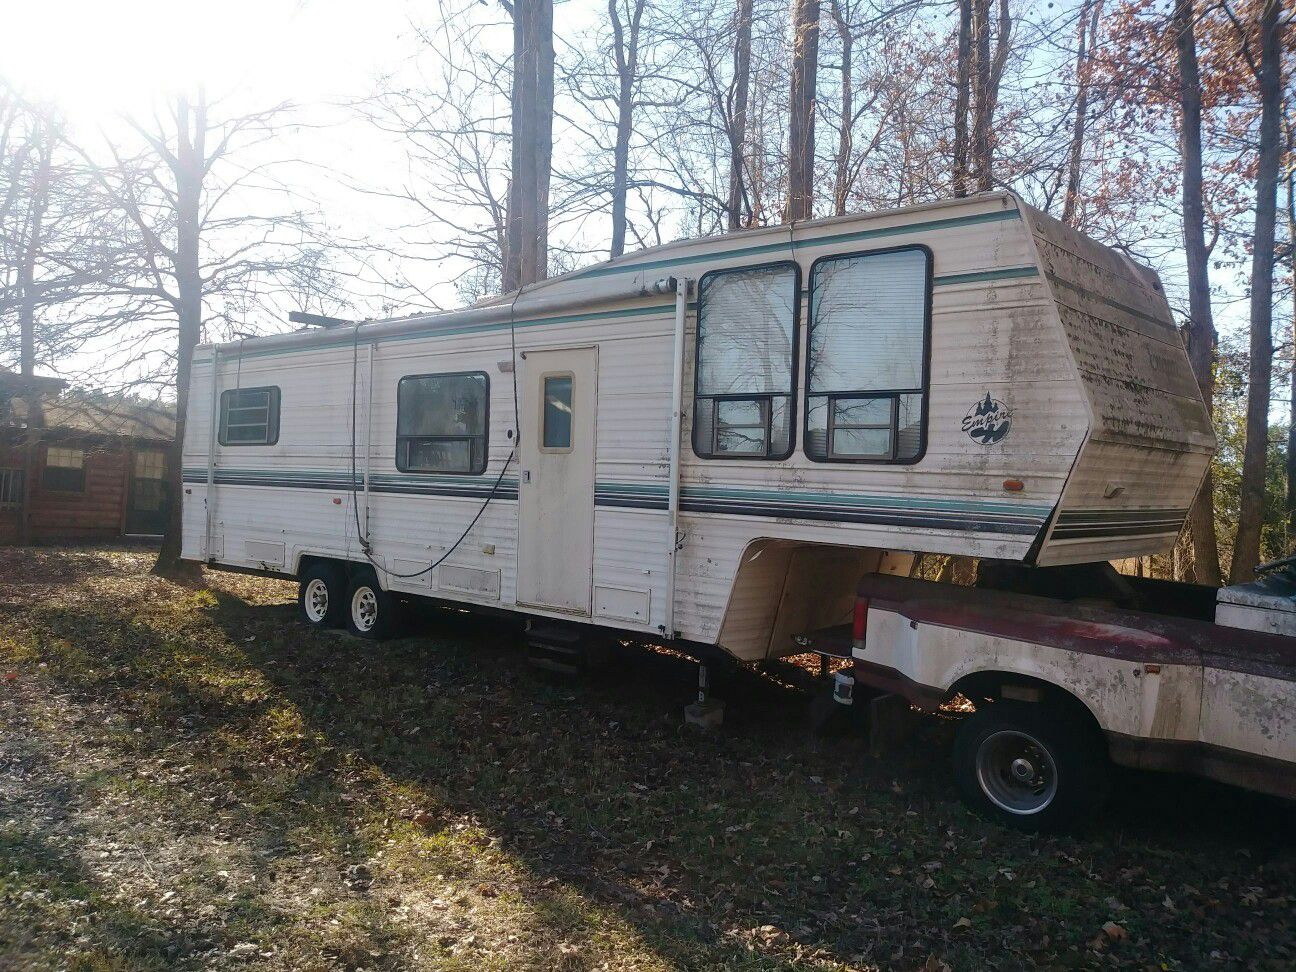 FREE RV !!! MUST BE ABLE TO COME GET IT!!